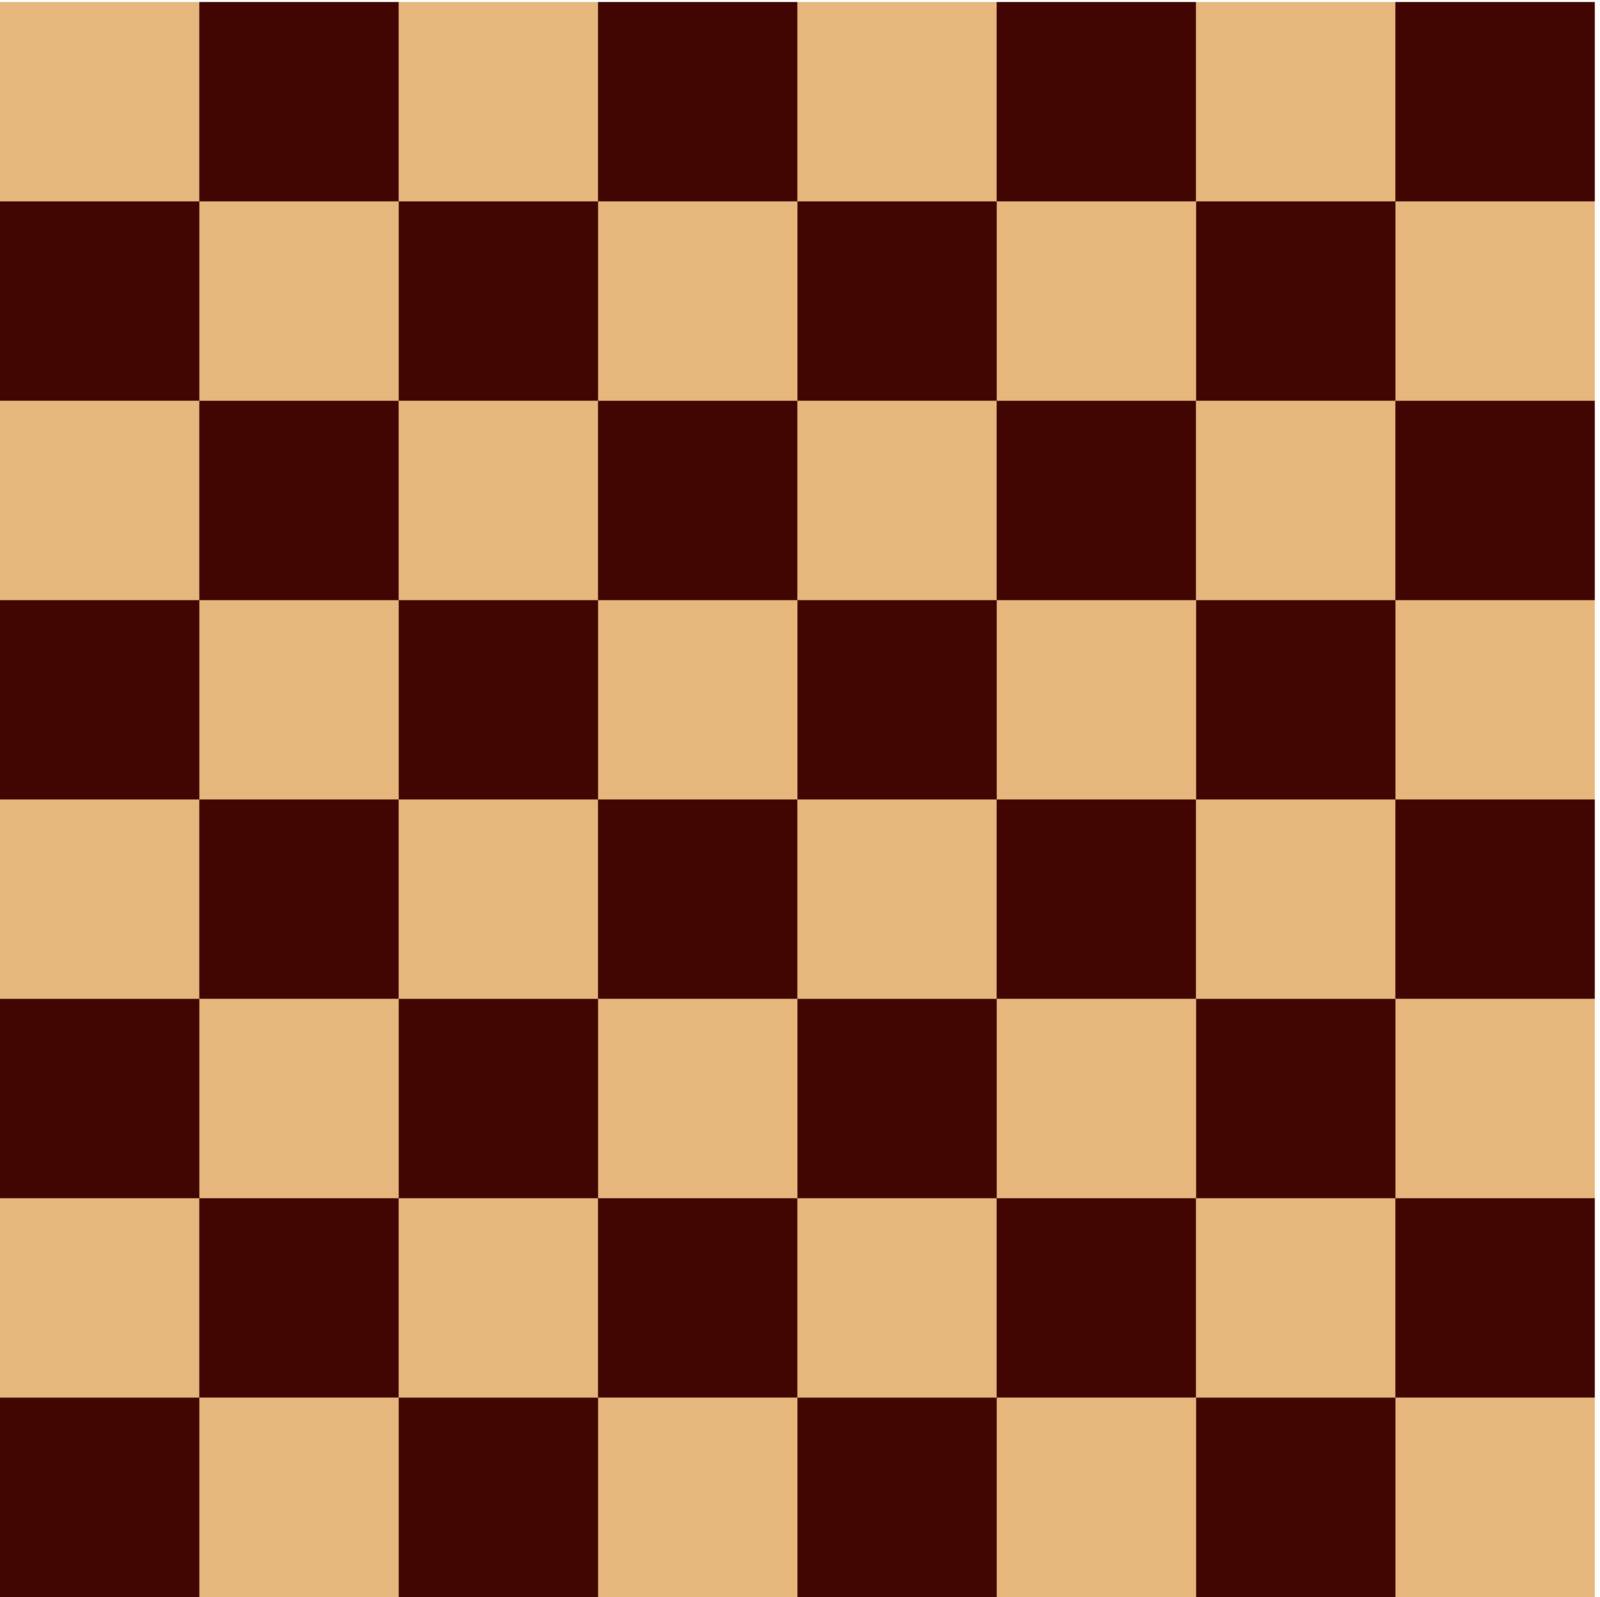 Chess board as texture. A vector illustration